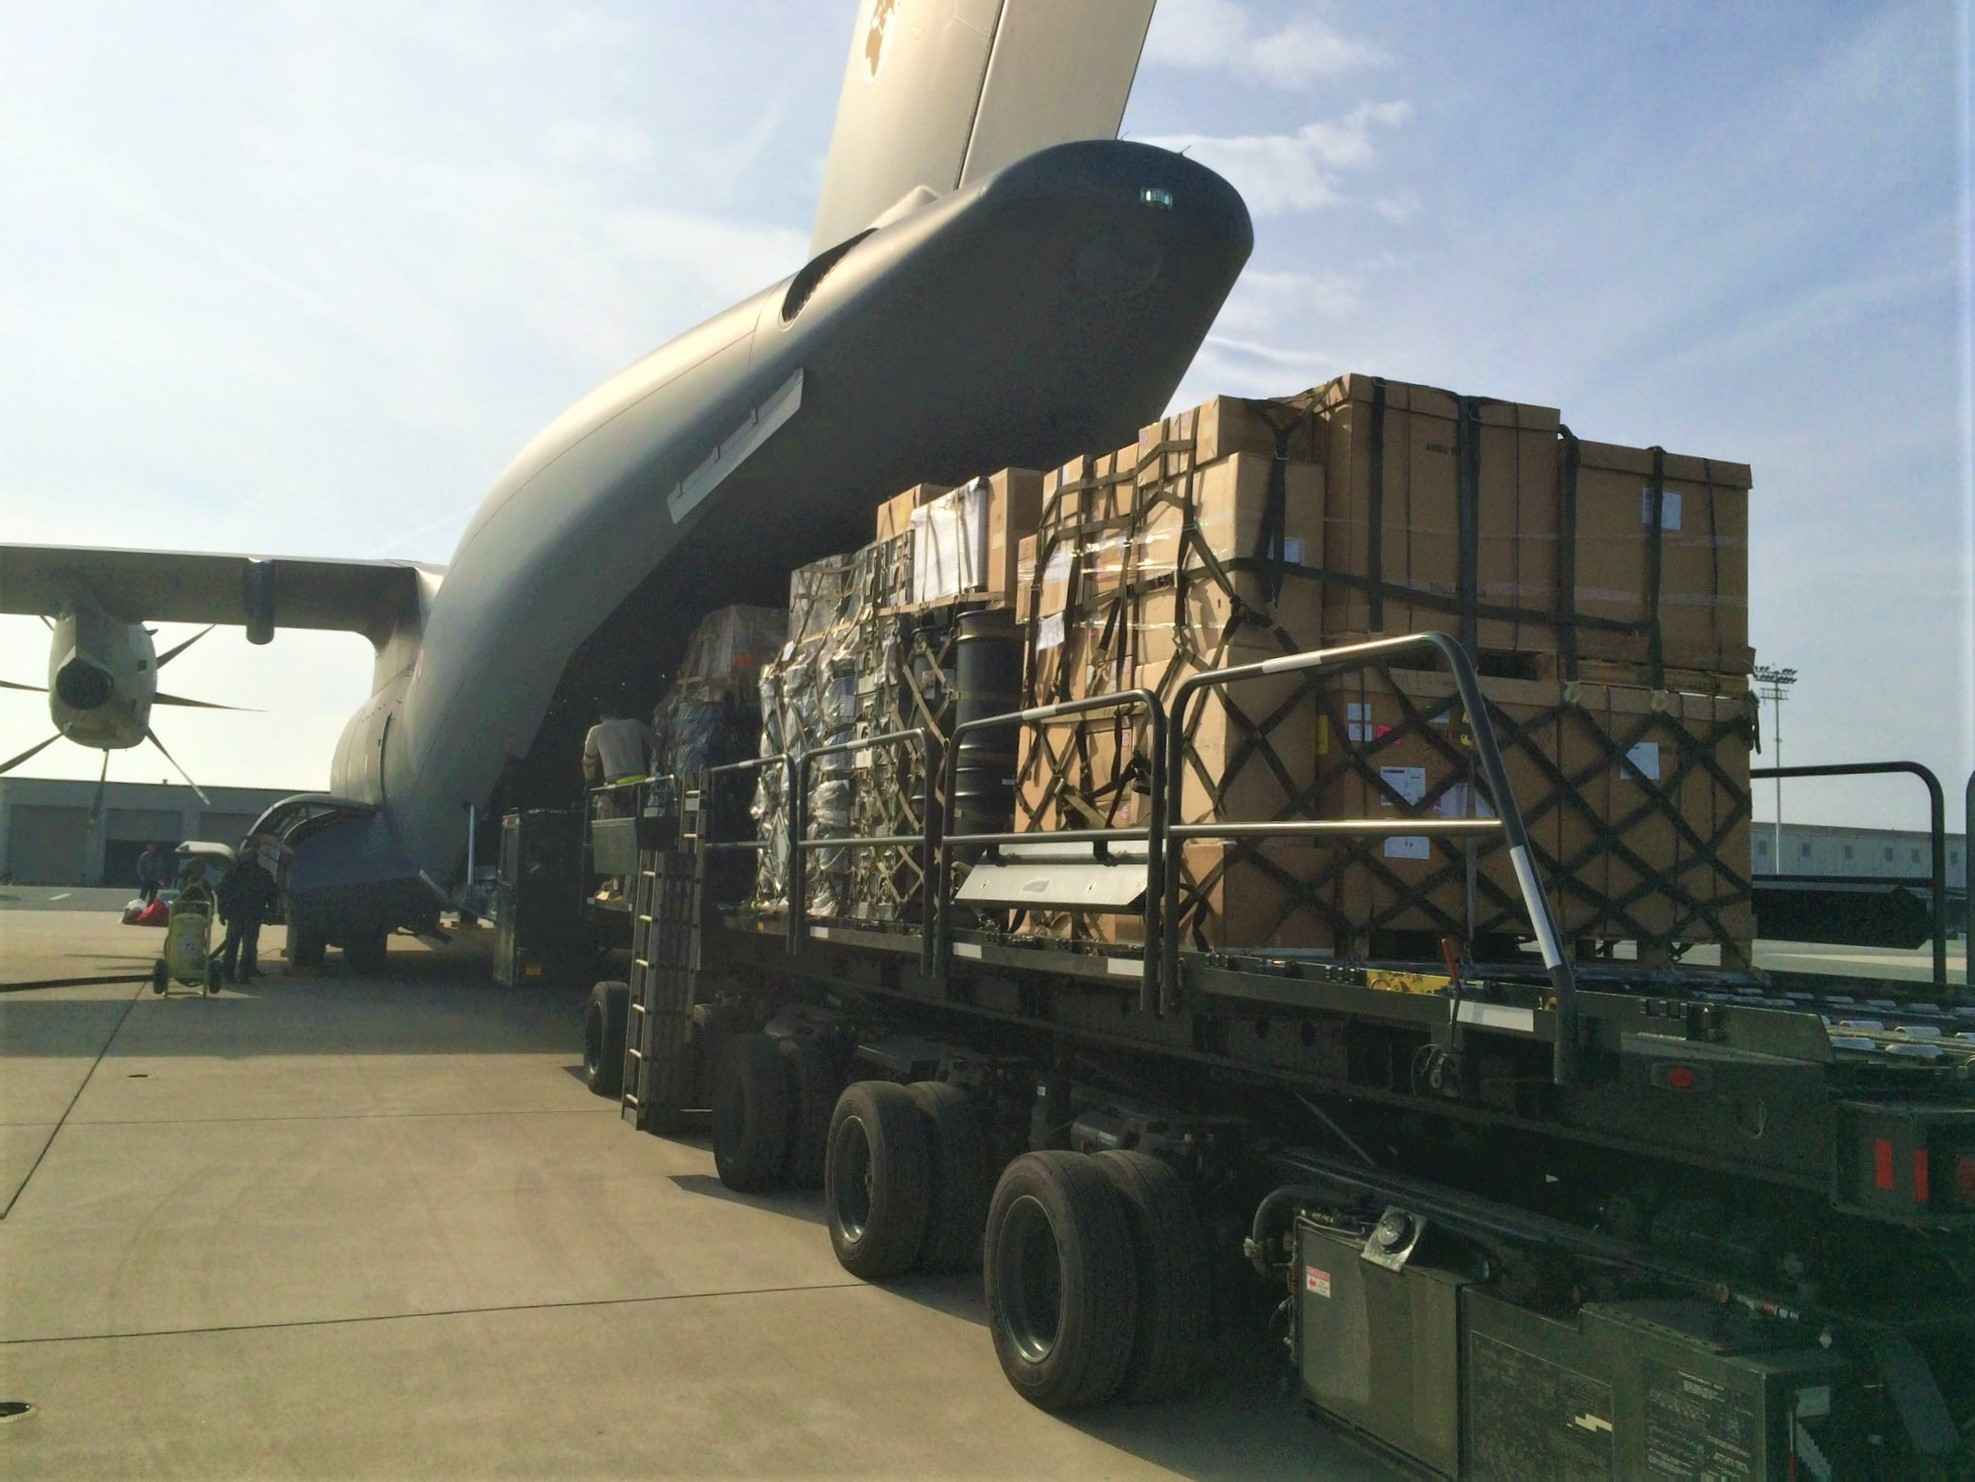 Freight being loaded onto a plane